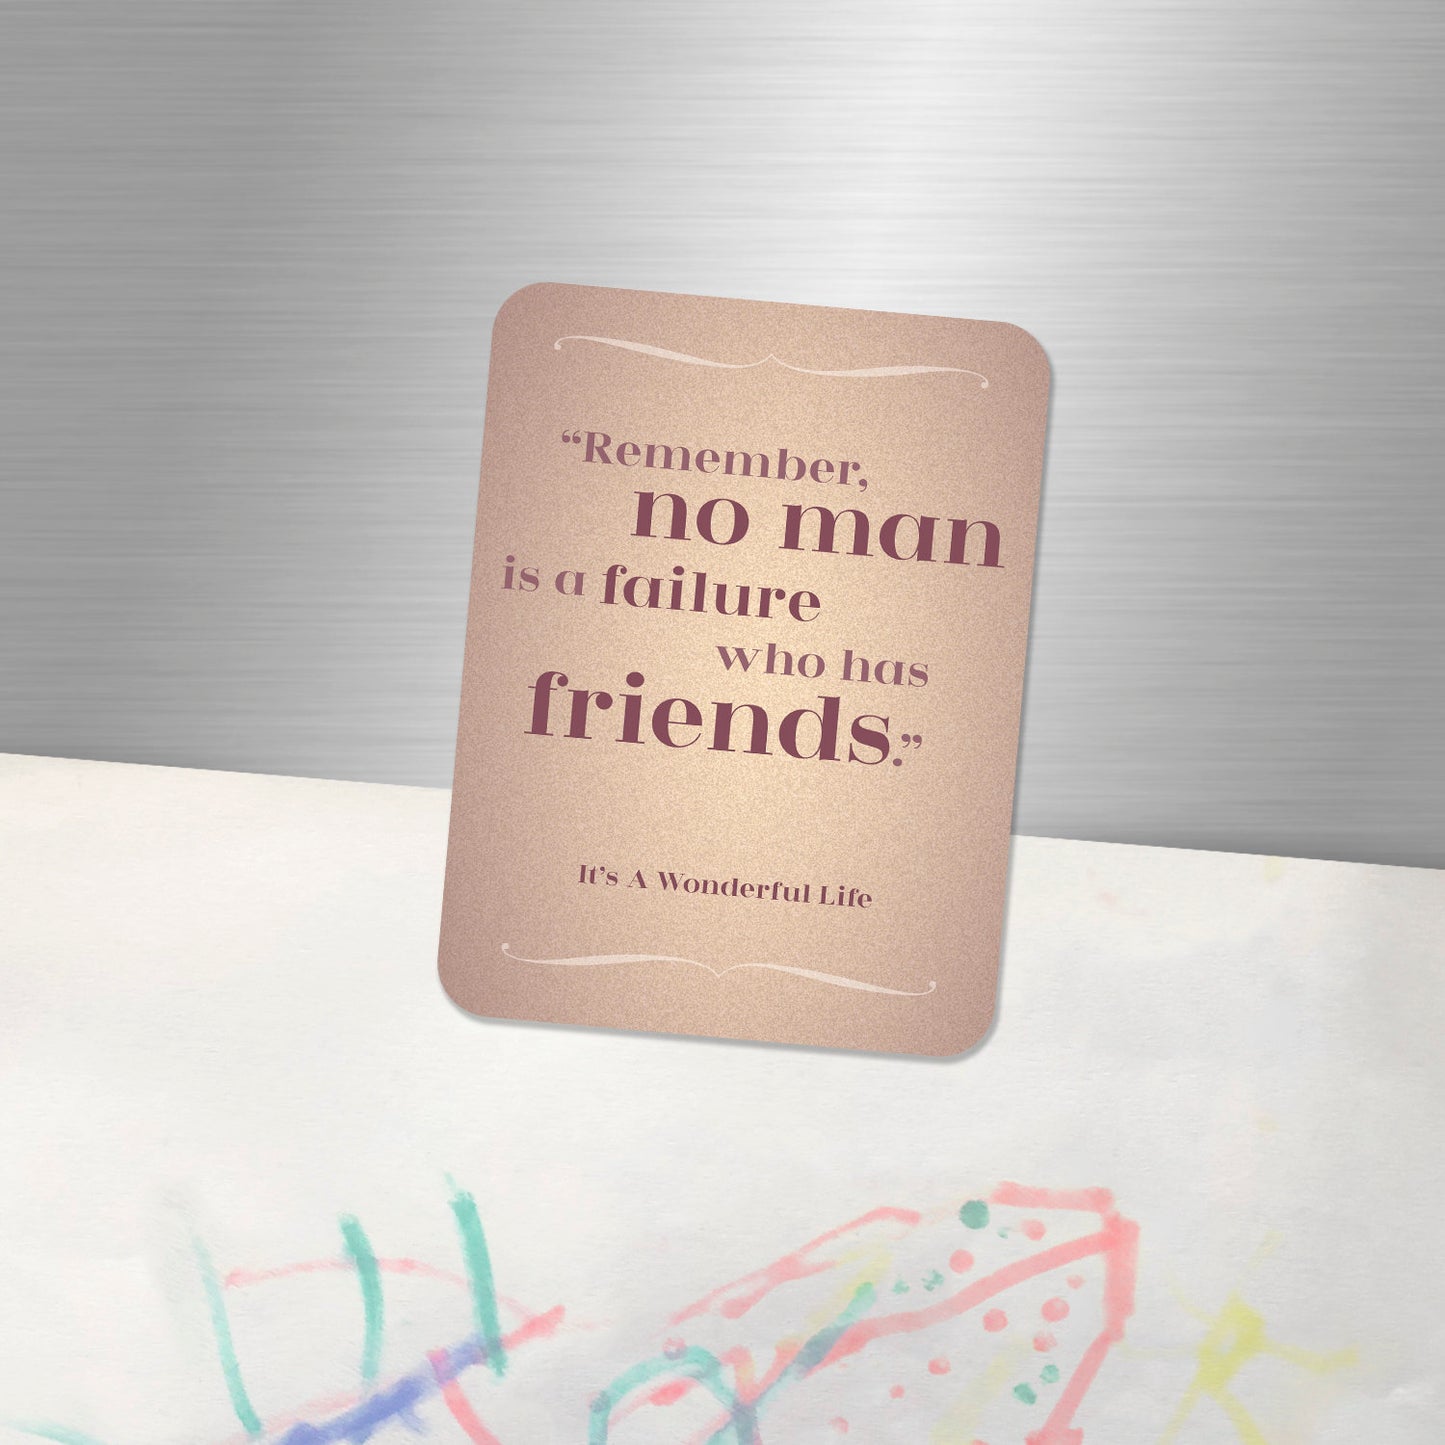 Fridge Magnet "Remember No Man is a Failure who has Friends", from It's A Wonderful Life, Friendship Quote, great gift for friend